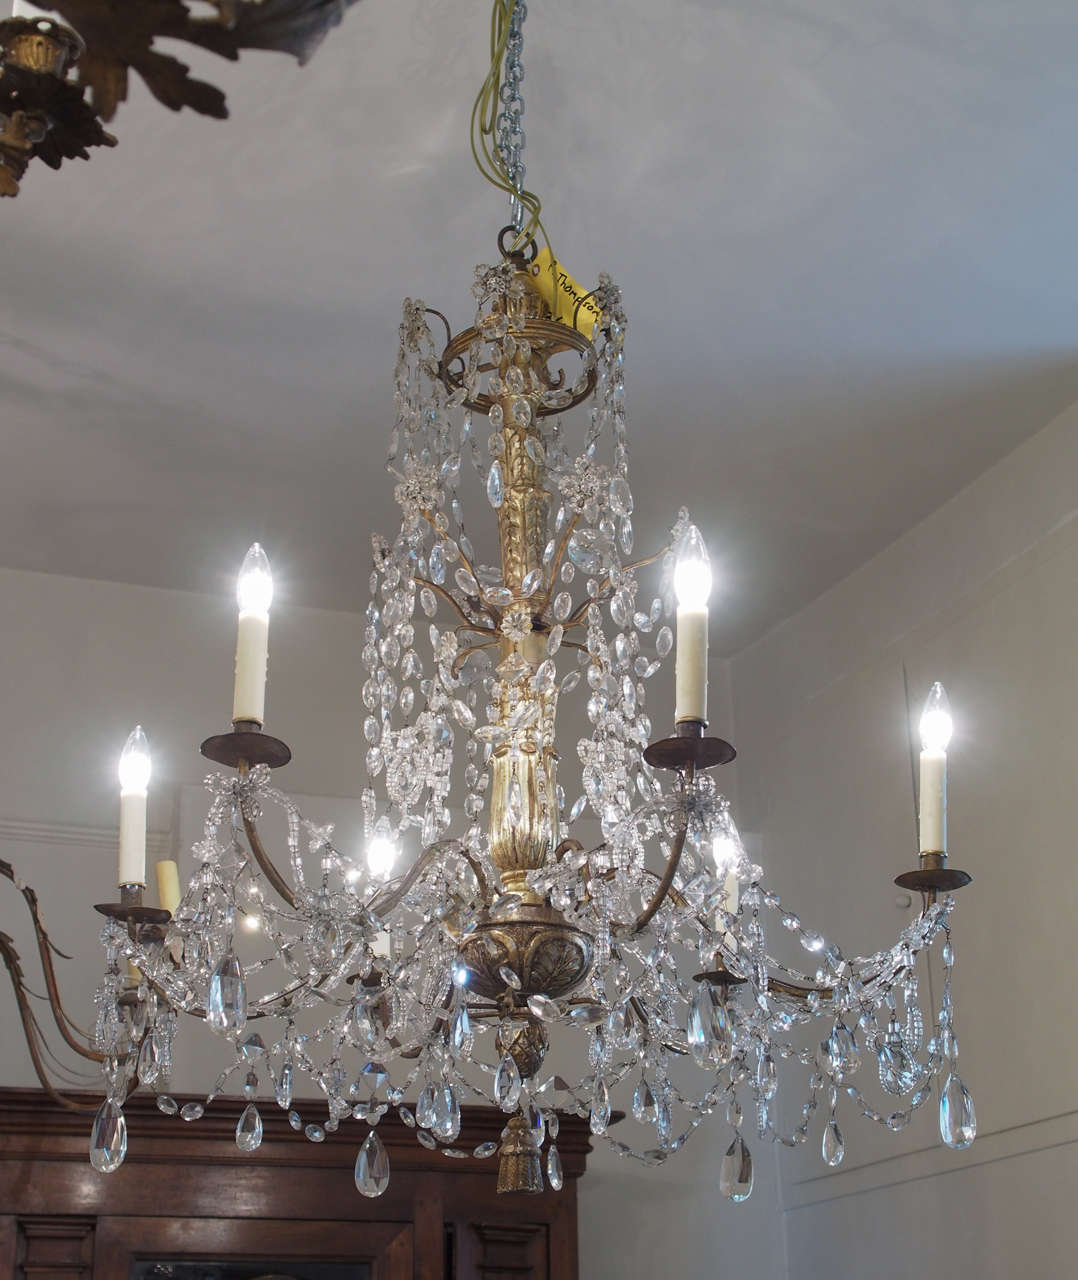 19th century Italian crystal chandelier bearing six iron arms with tole bobeches and a carved wood gilded body.
US wired.